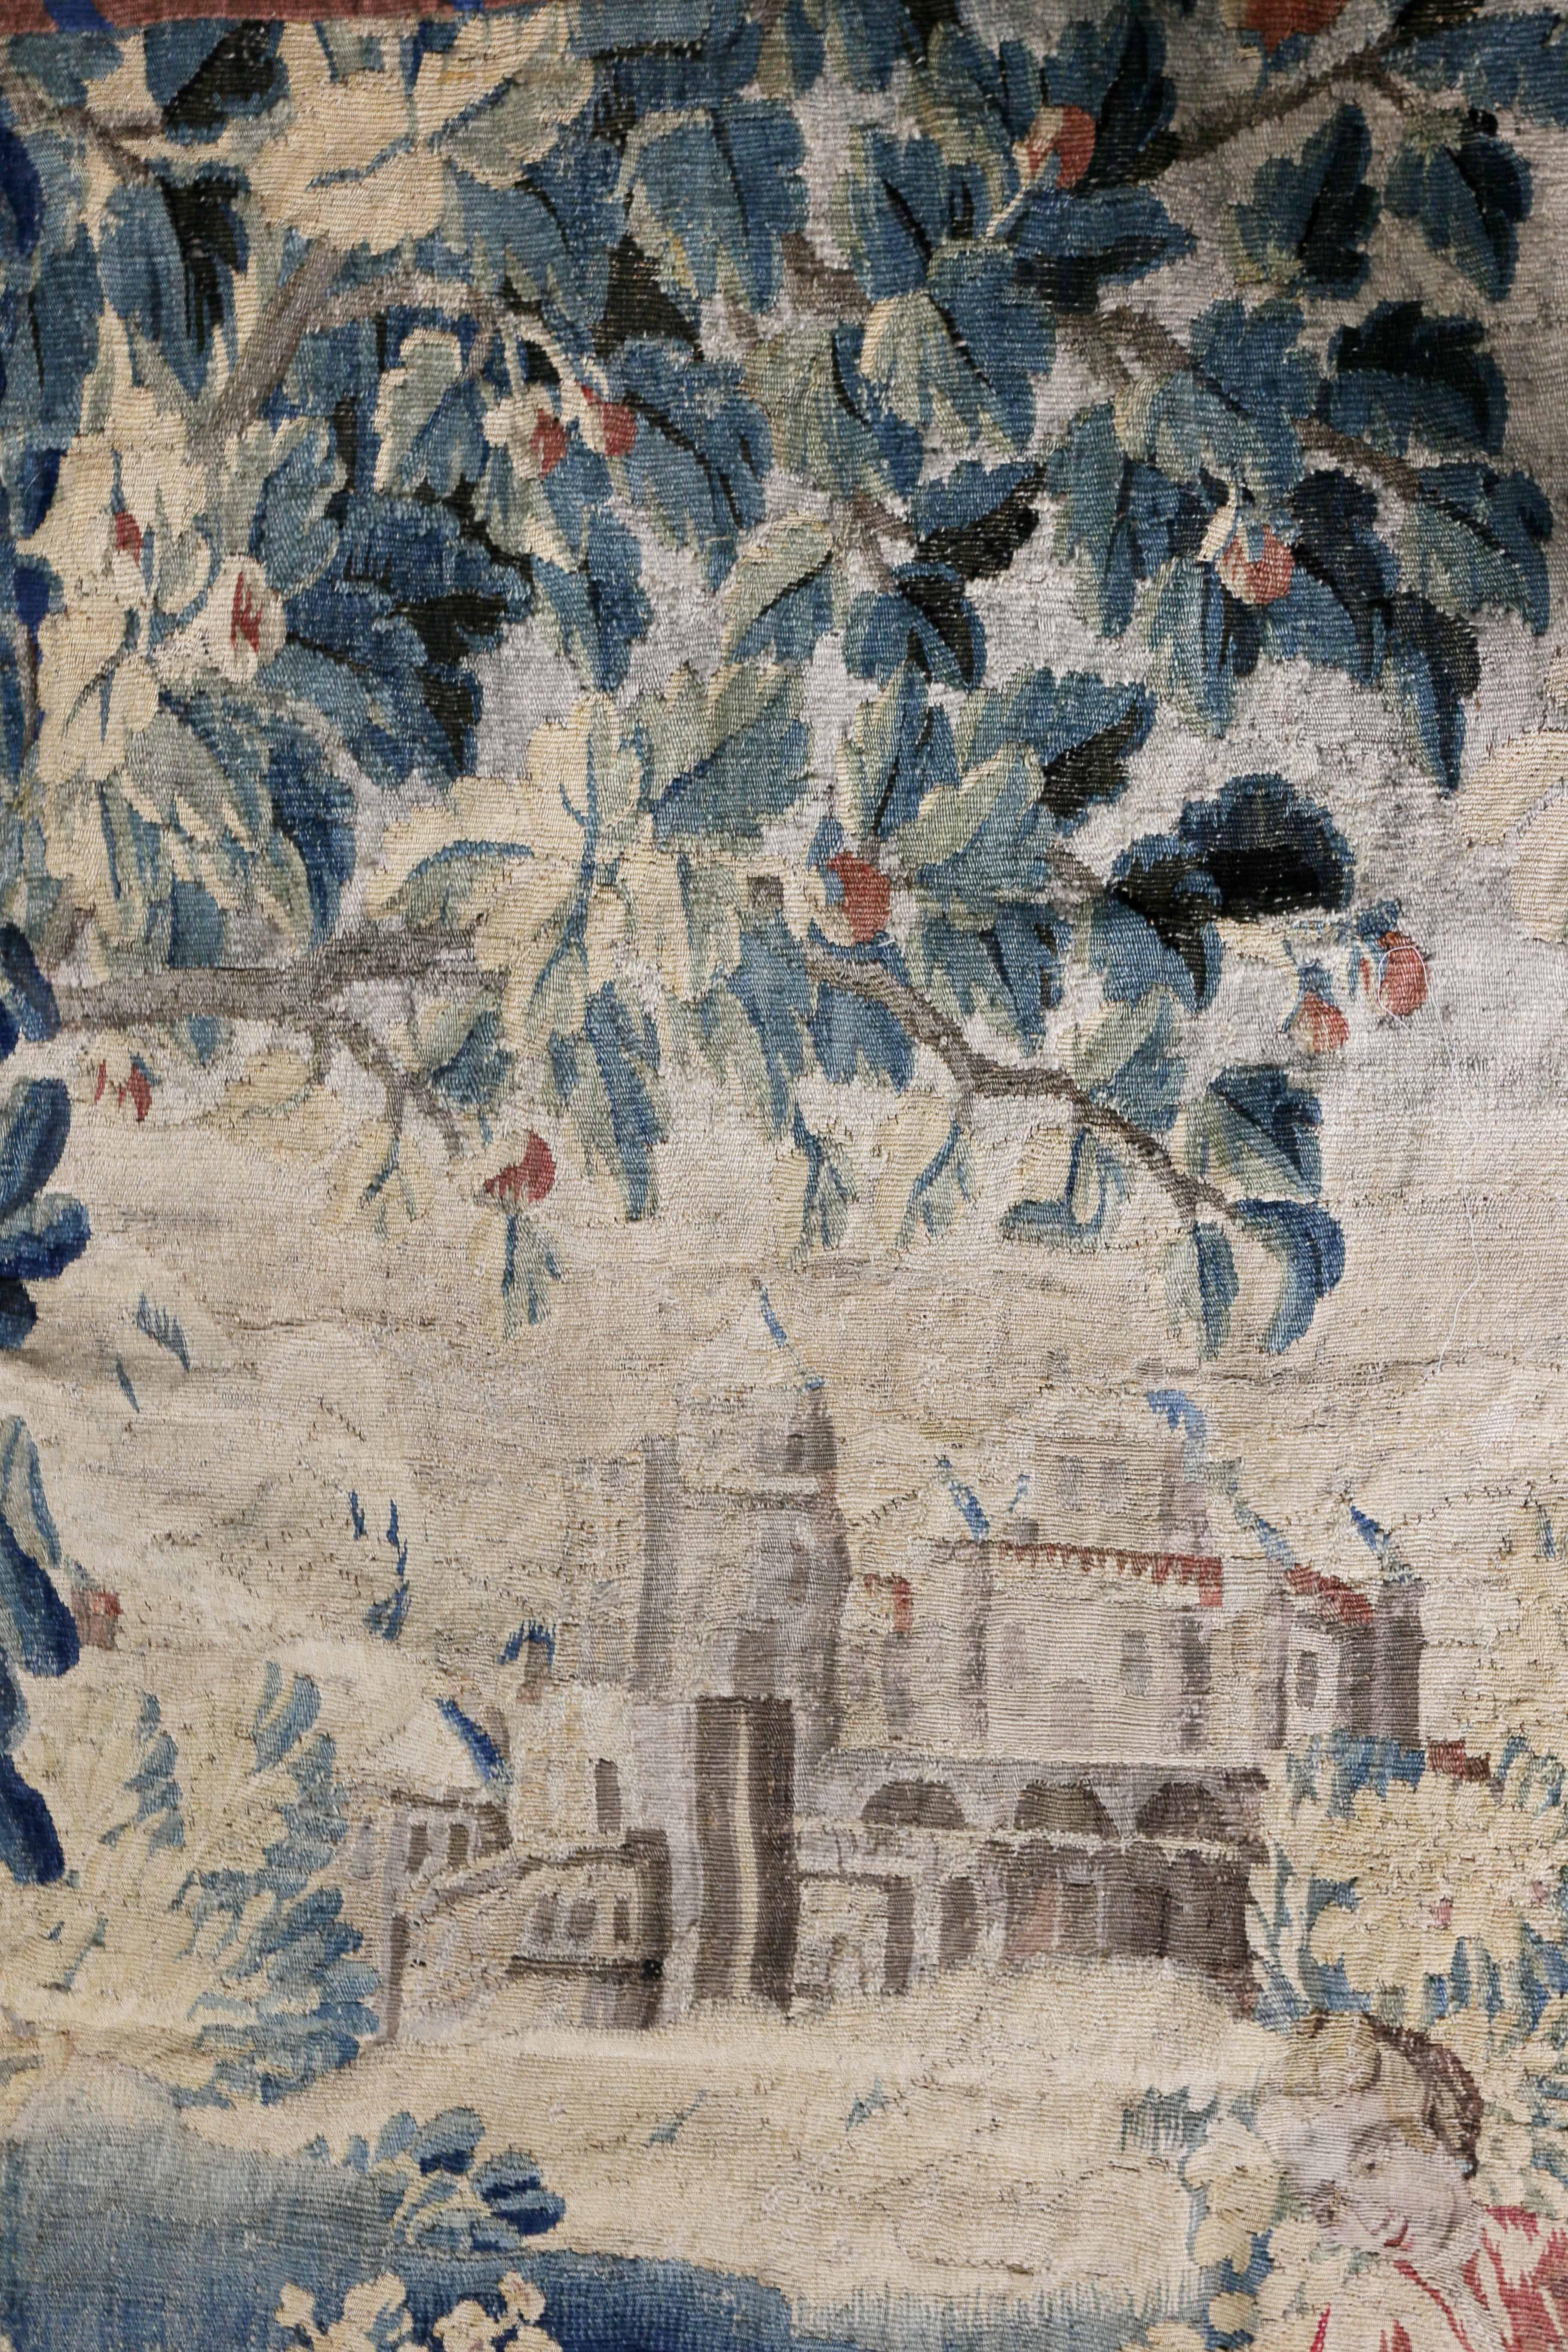 With ribbon border and scene of a couple with sheep in the foreground and castle in the background.